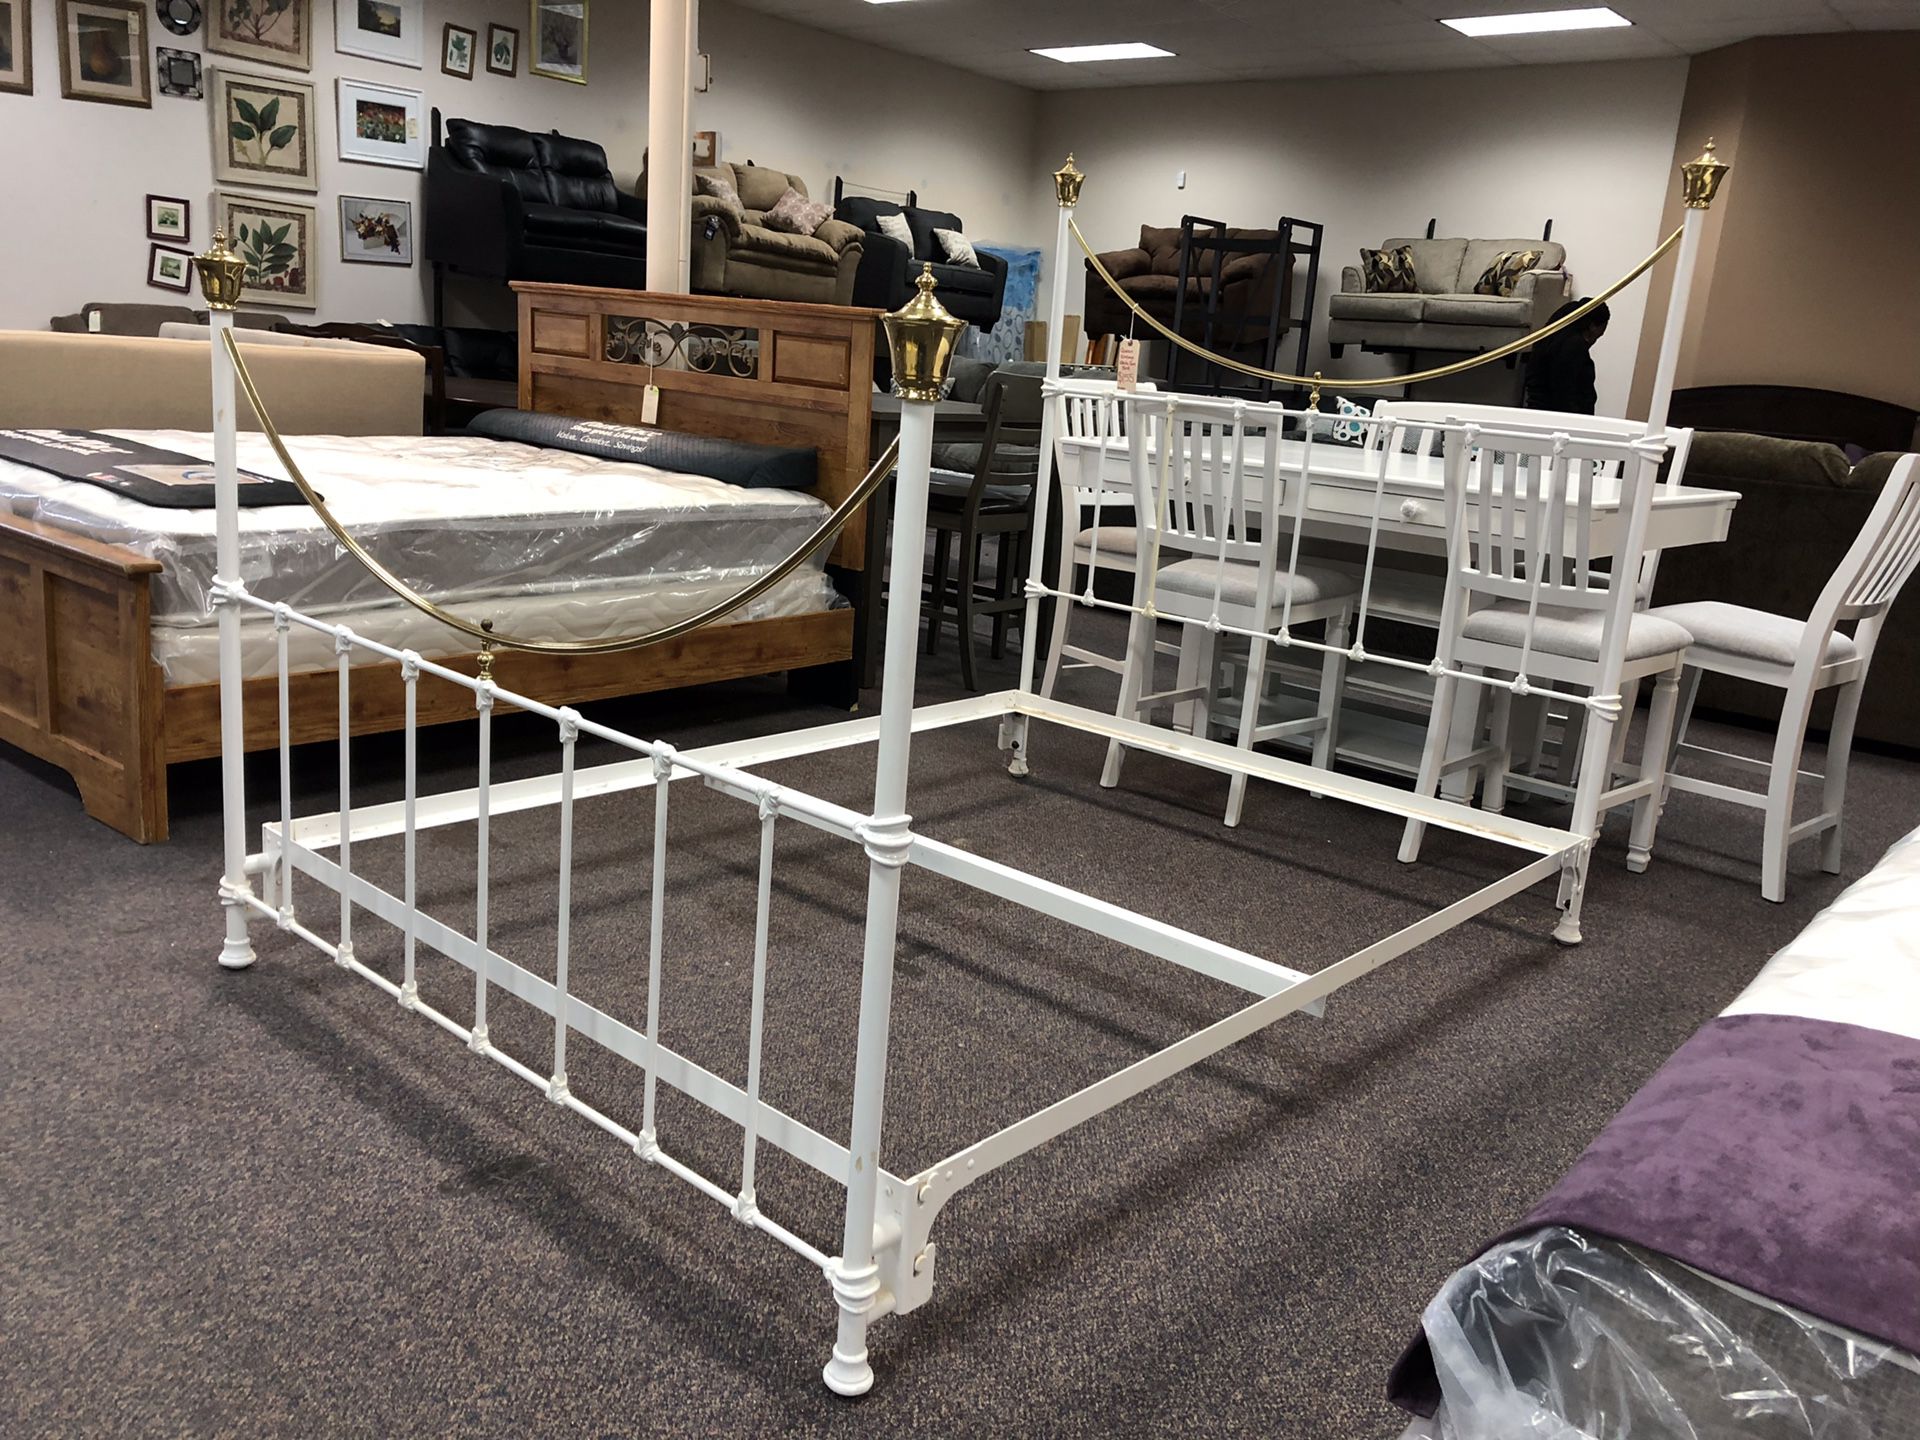 Queen Sized Vintage Iron Bed